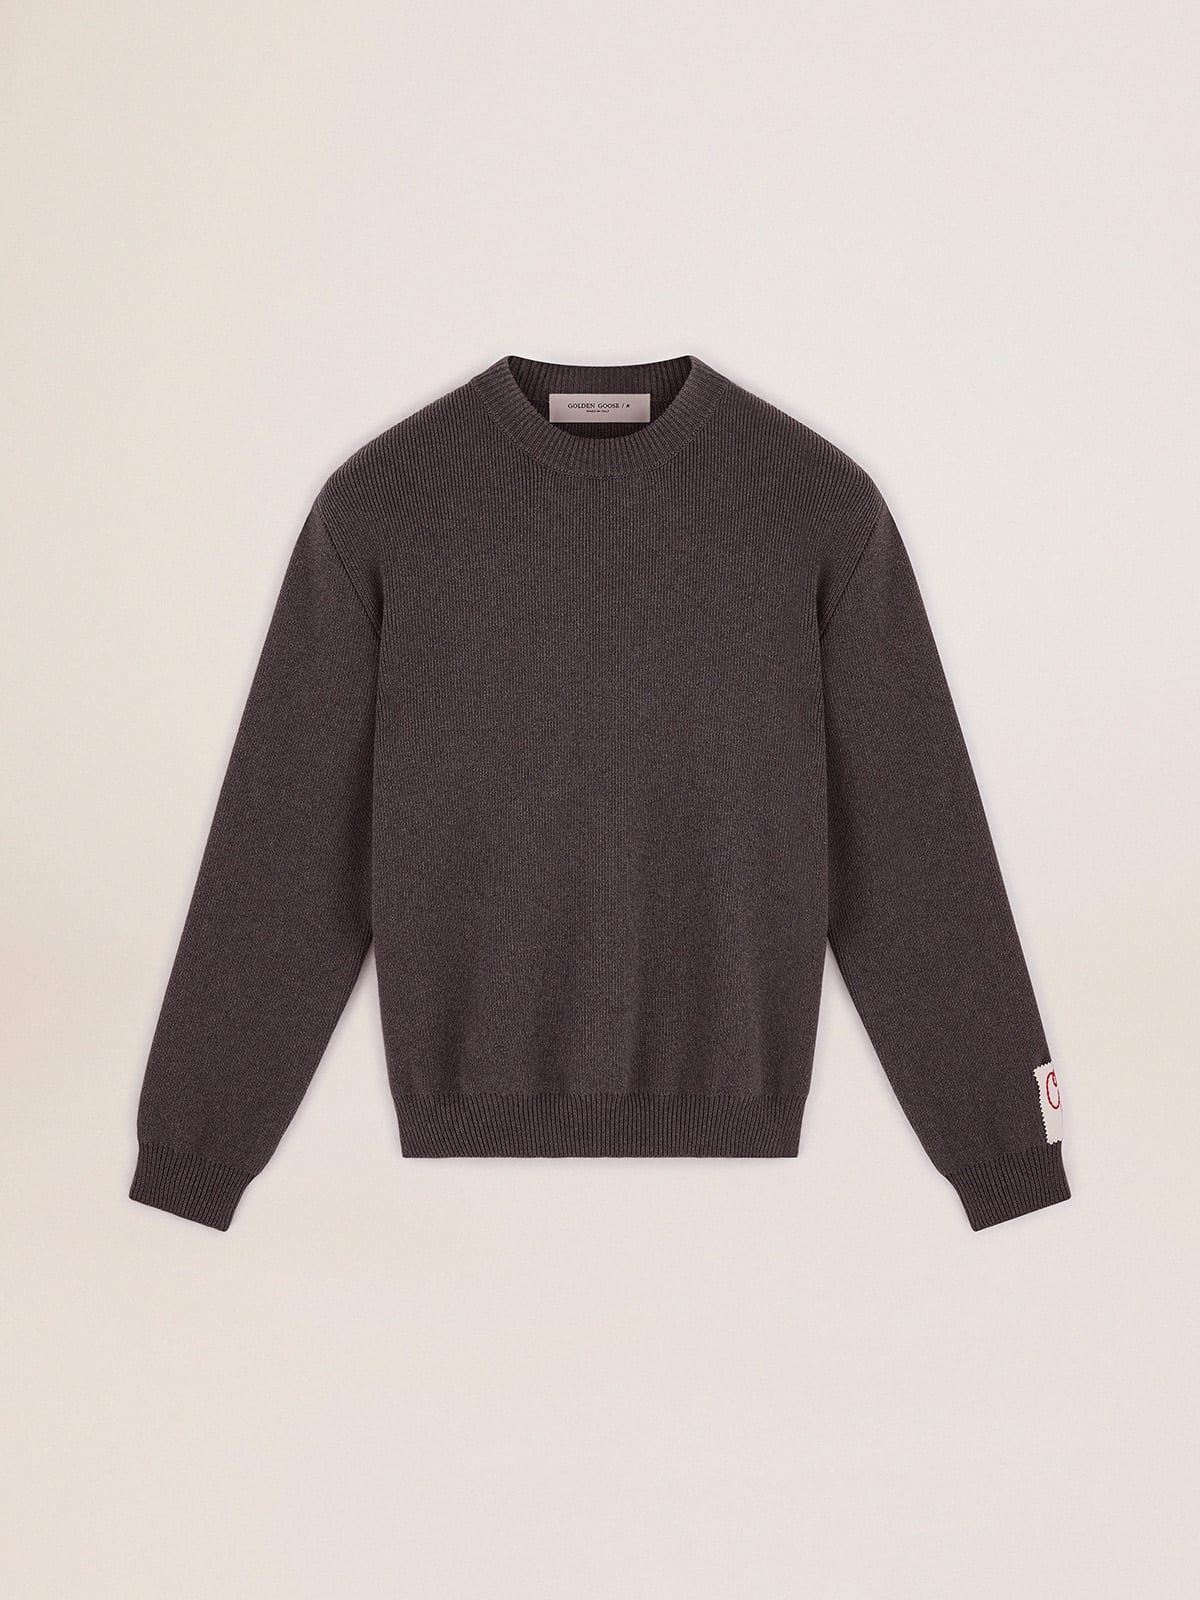 Men's round-neck sweater in dark gray cotton with logo on the back - 1